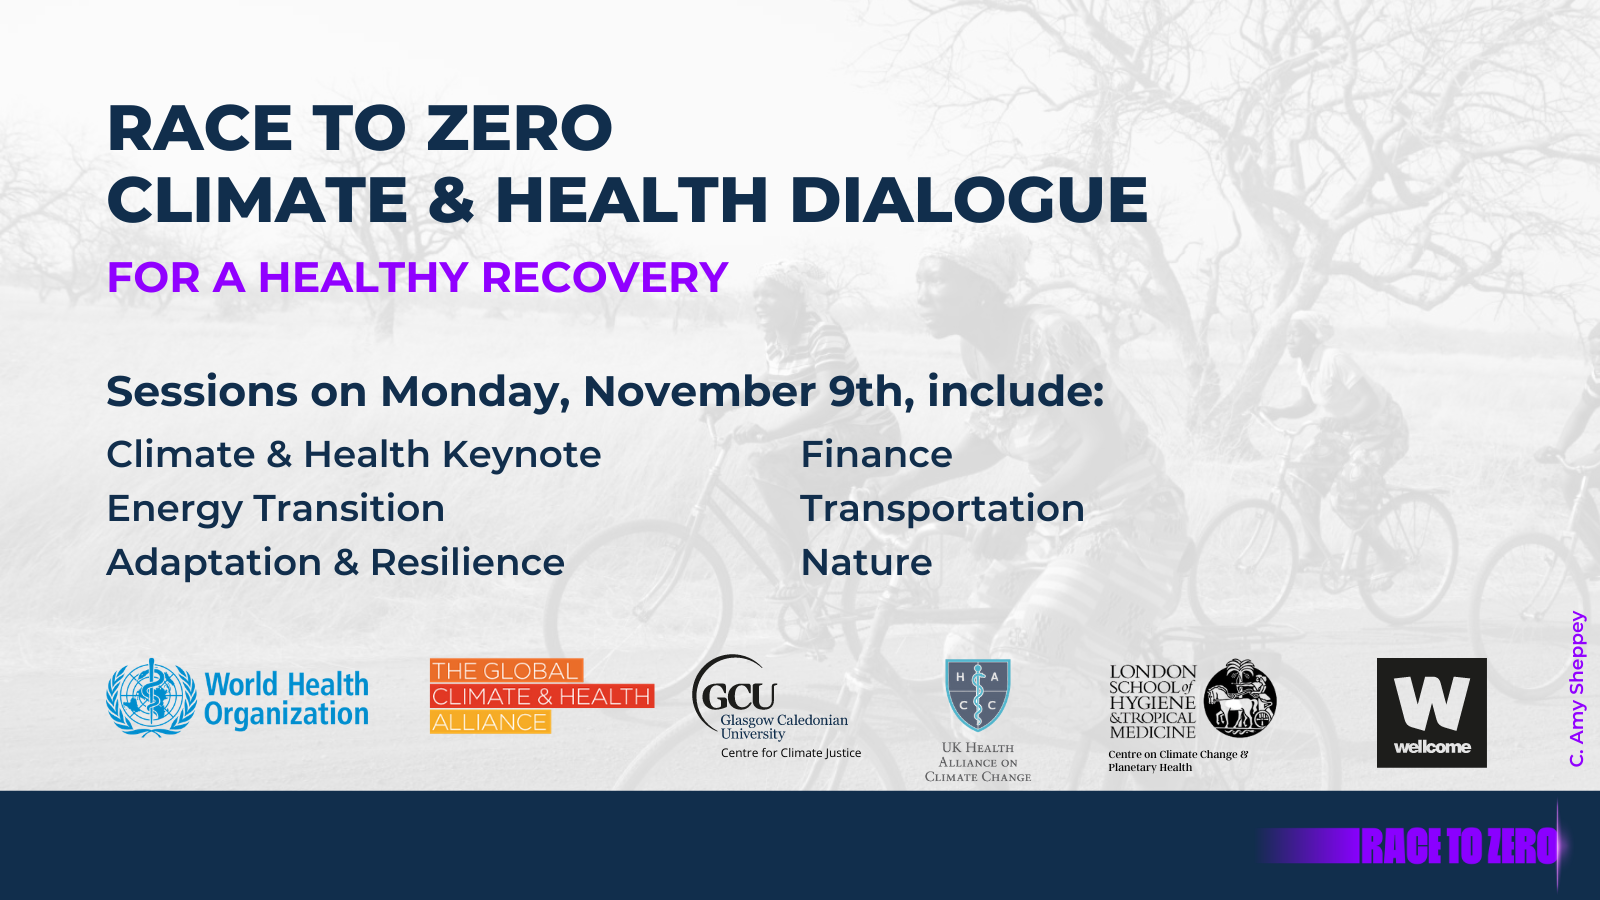 November 9th Global Health Gathering to Call for Ambitious Climate & Health Action - The Global Climate and Health Alliance